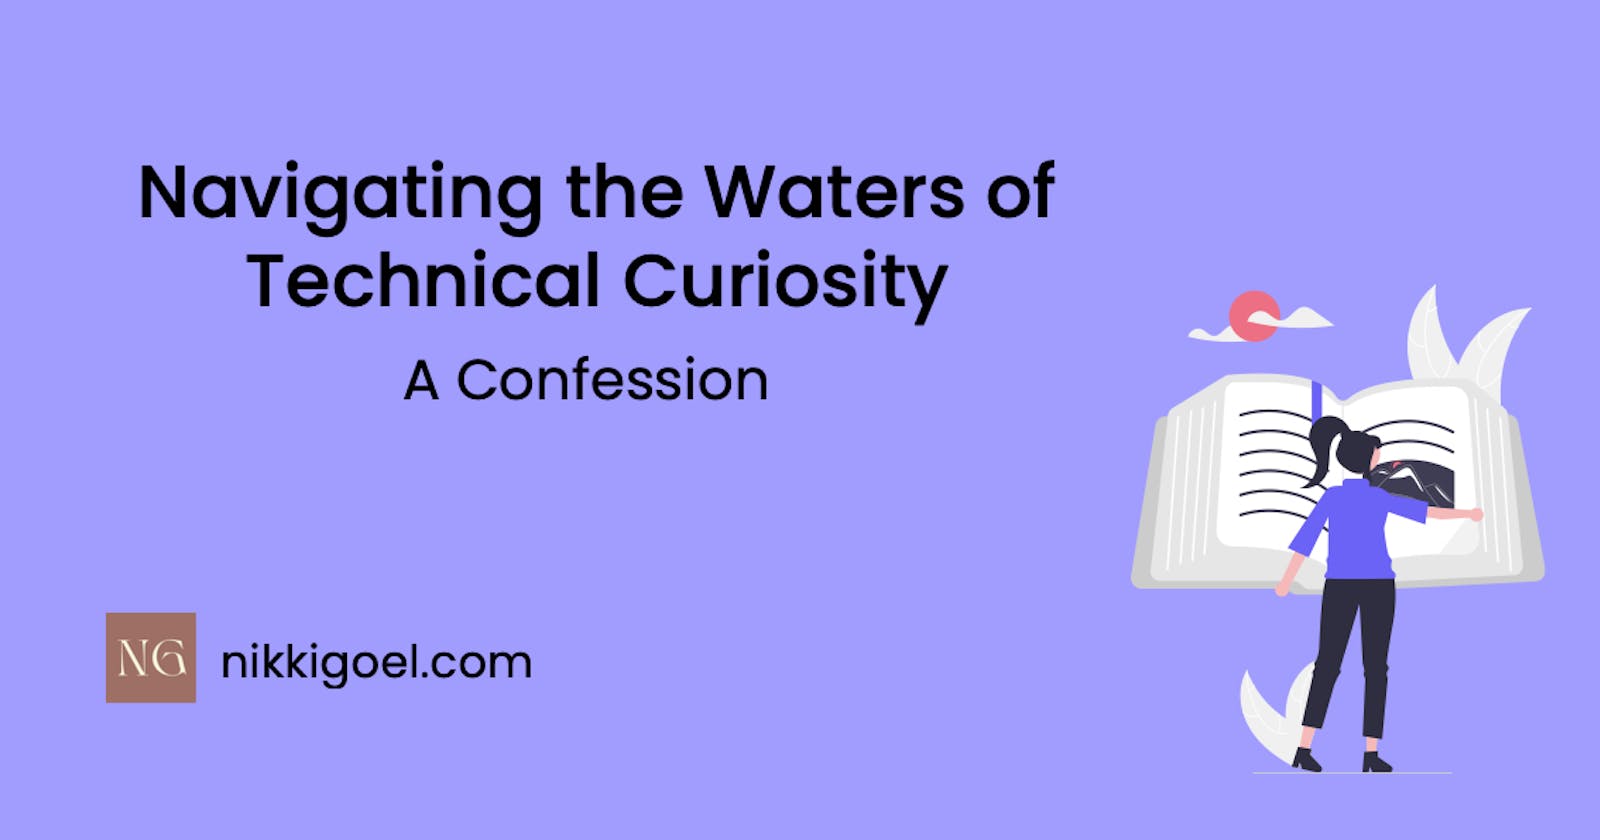 Navigating the Waters of Technical Curiosity: A Confession